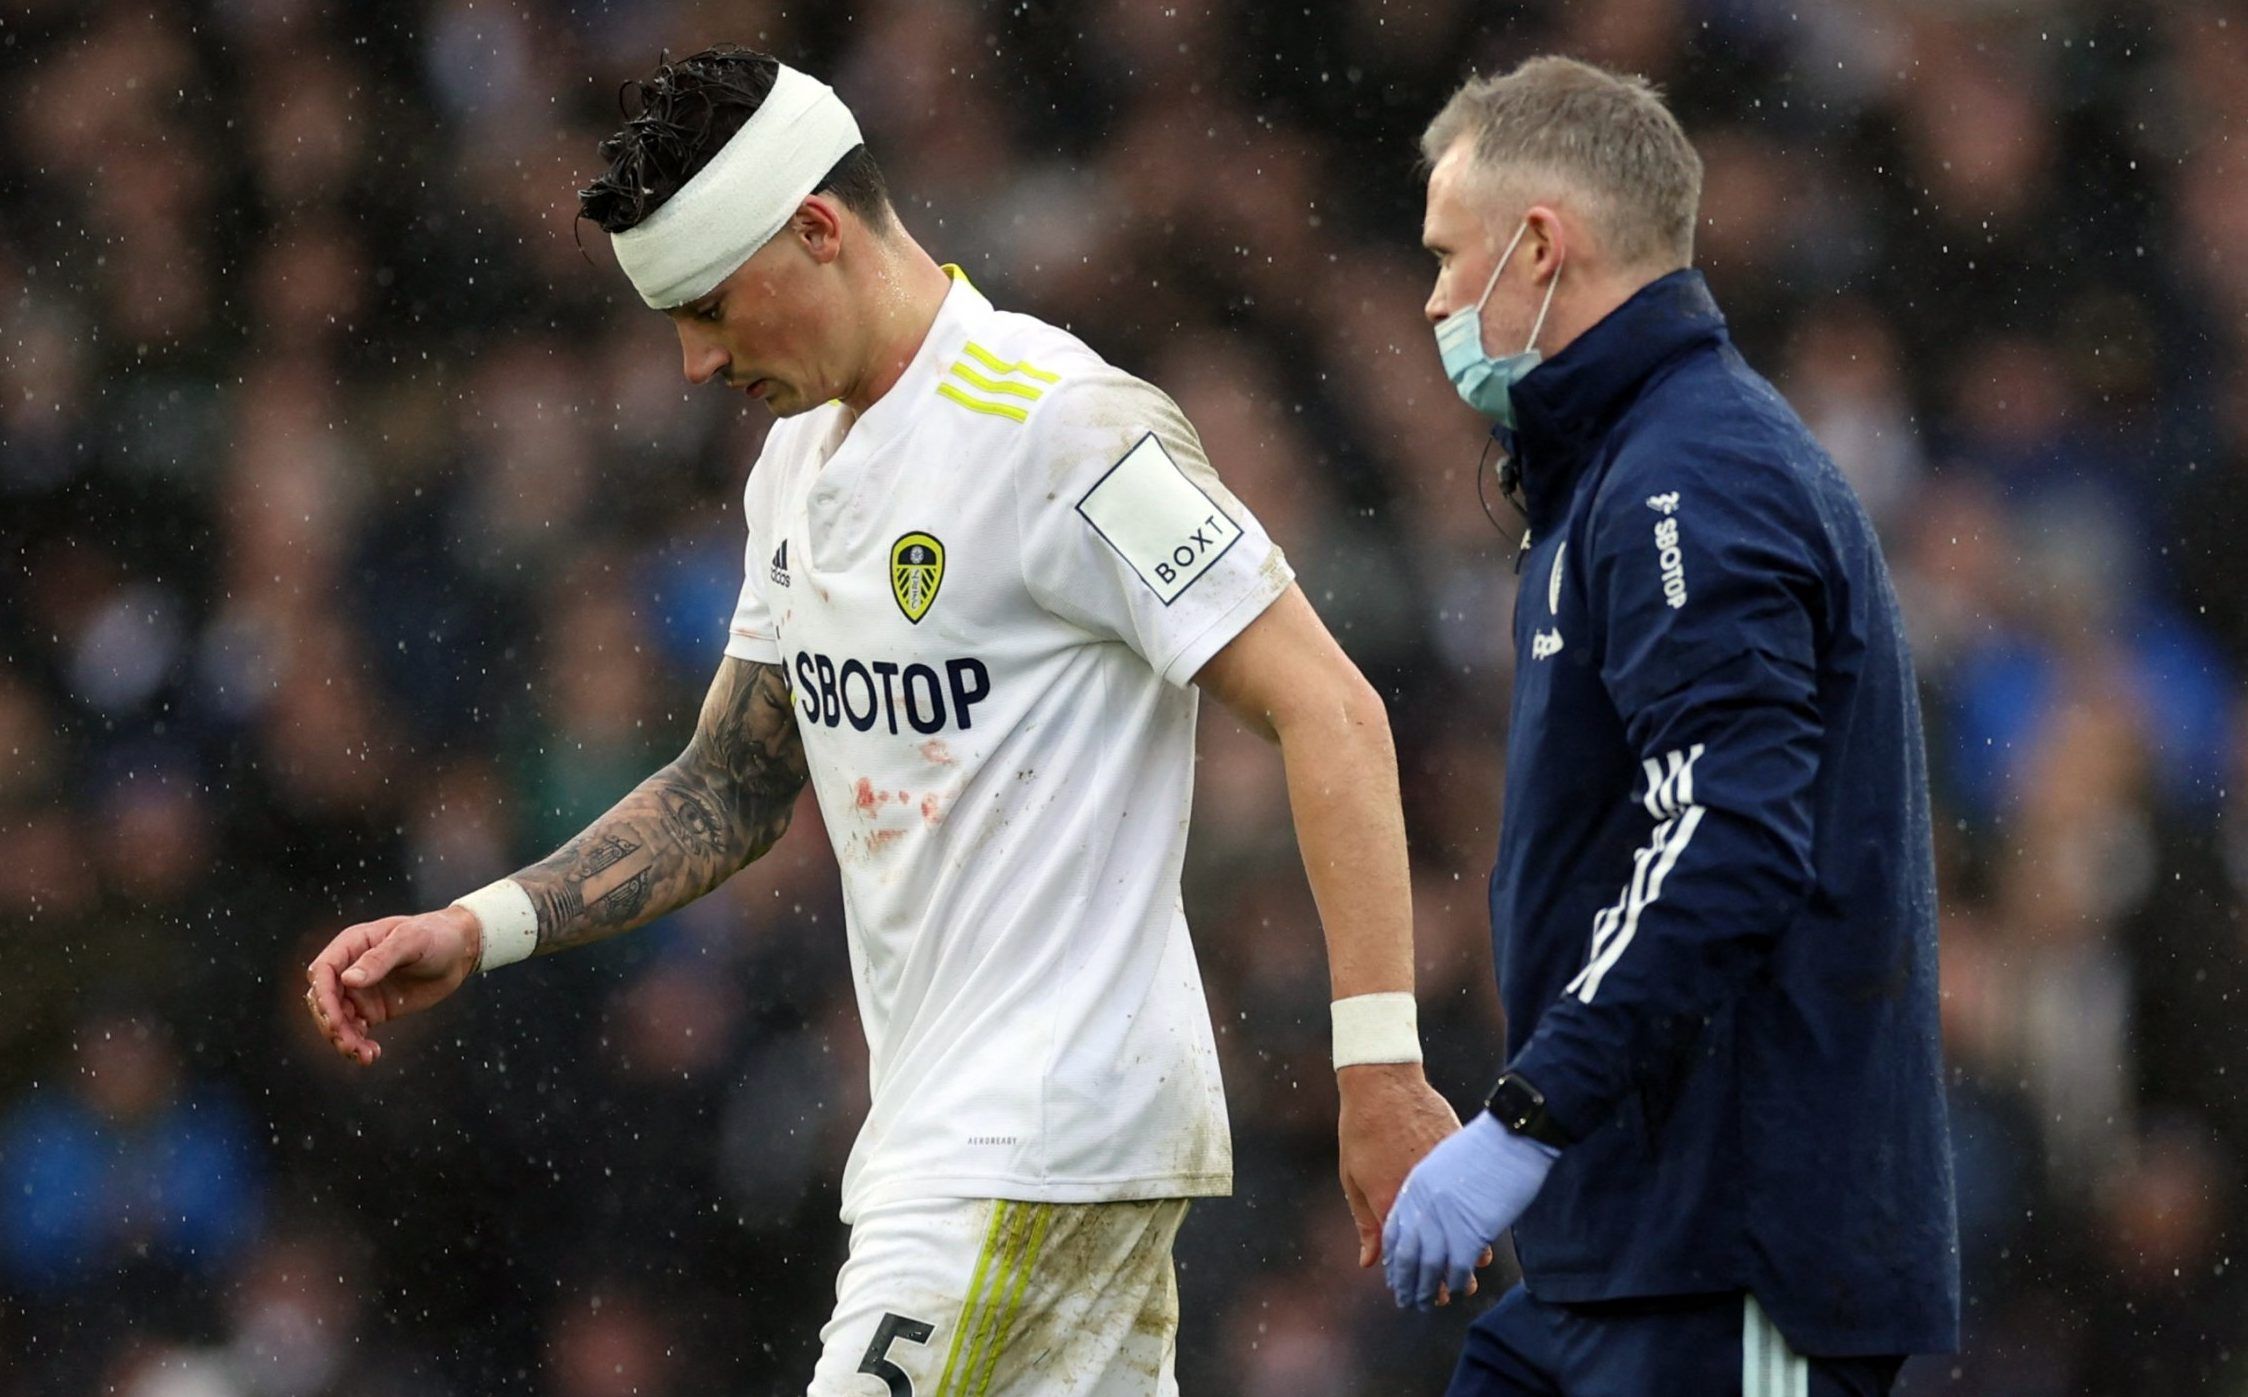 Leeds United defender Robin Koch leaves the pitch at Elland Road after receiving head treatment against Manchester United